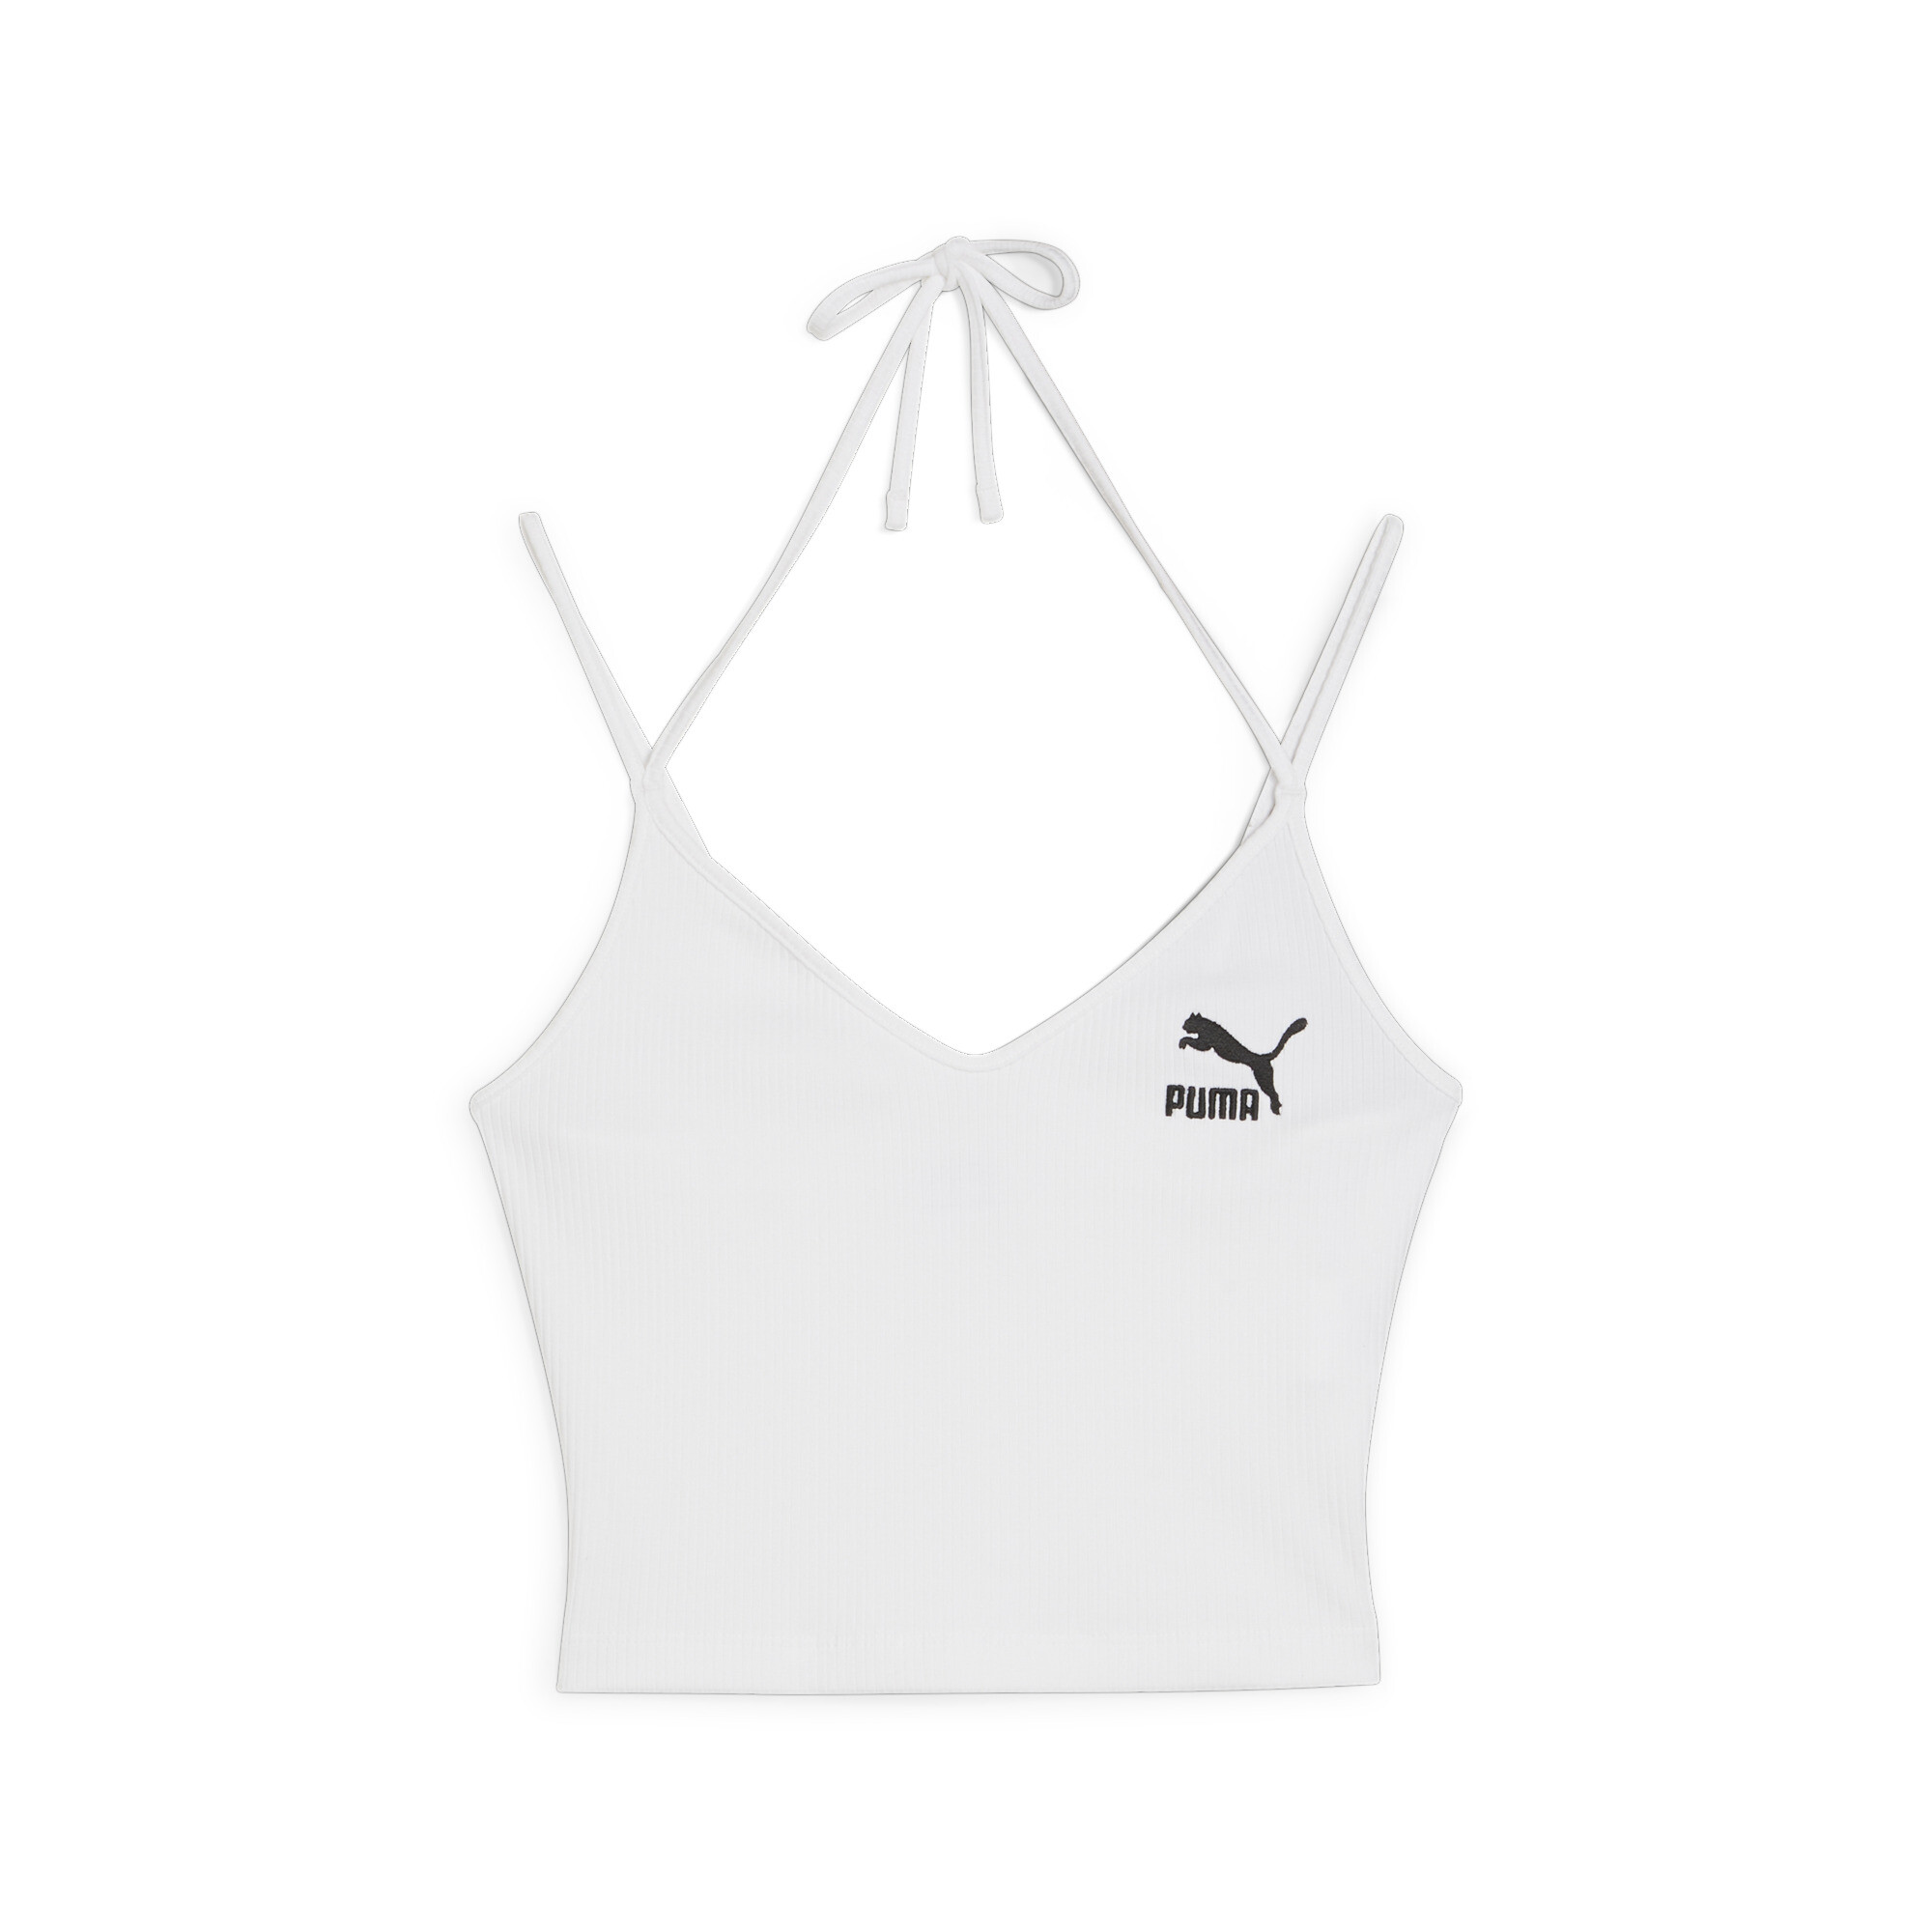 Women's PUMA CLASSICS Ribbed Crop Top In White, Size XL